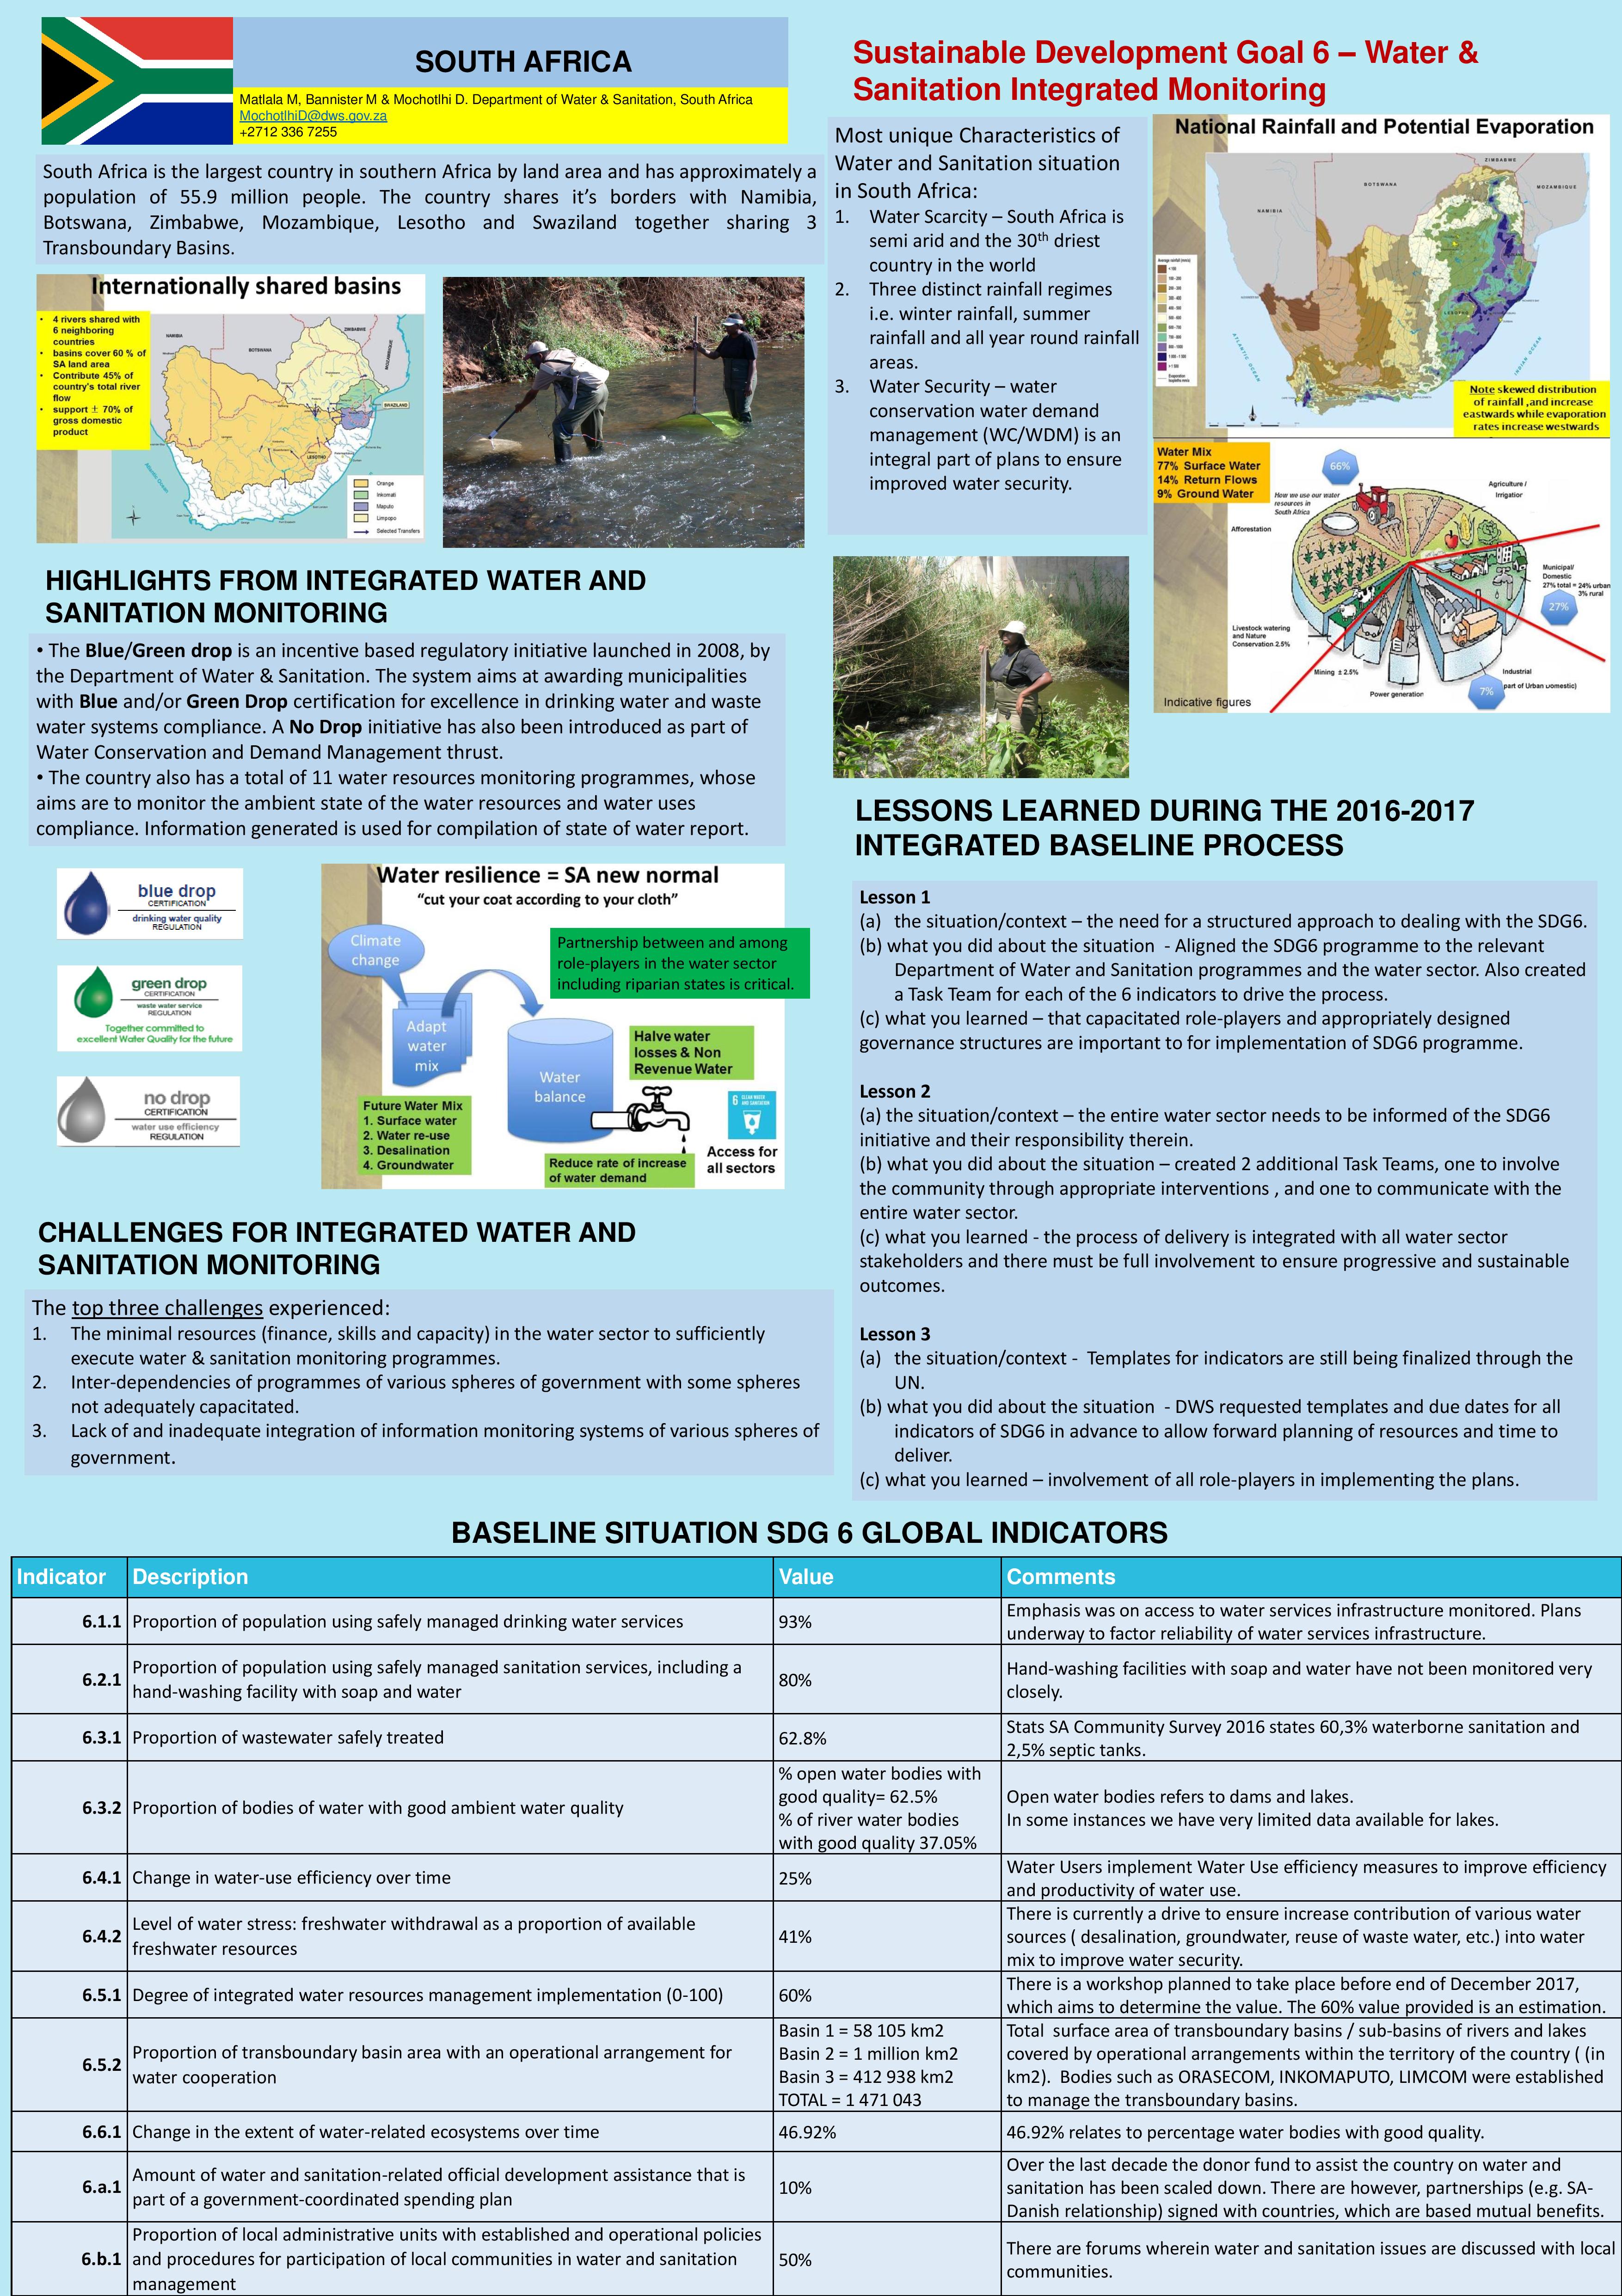 Water and saniation monitoring in South Africa at a glance